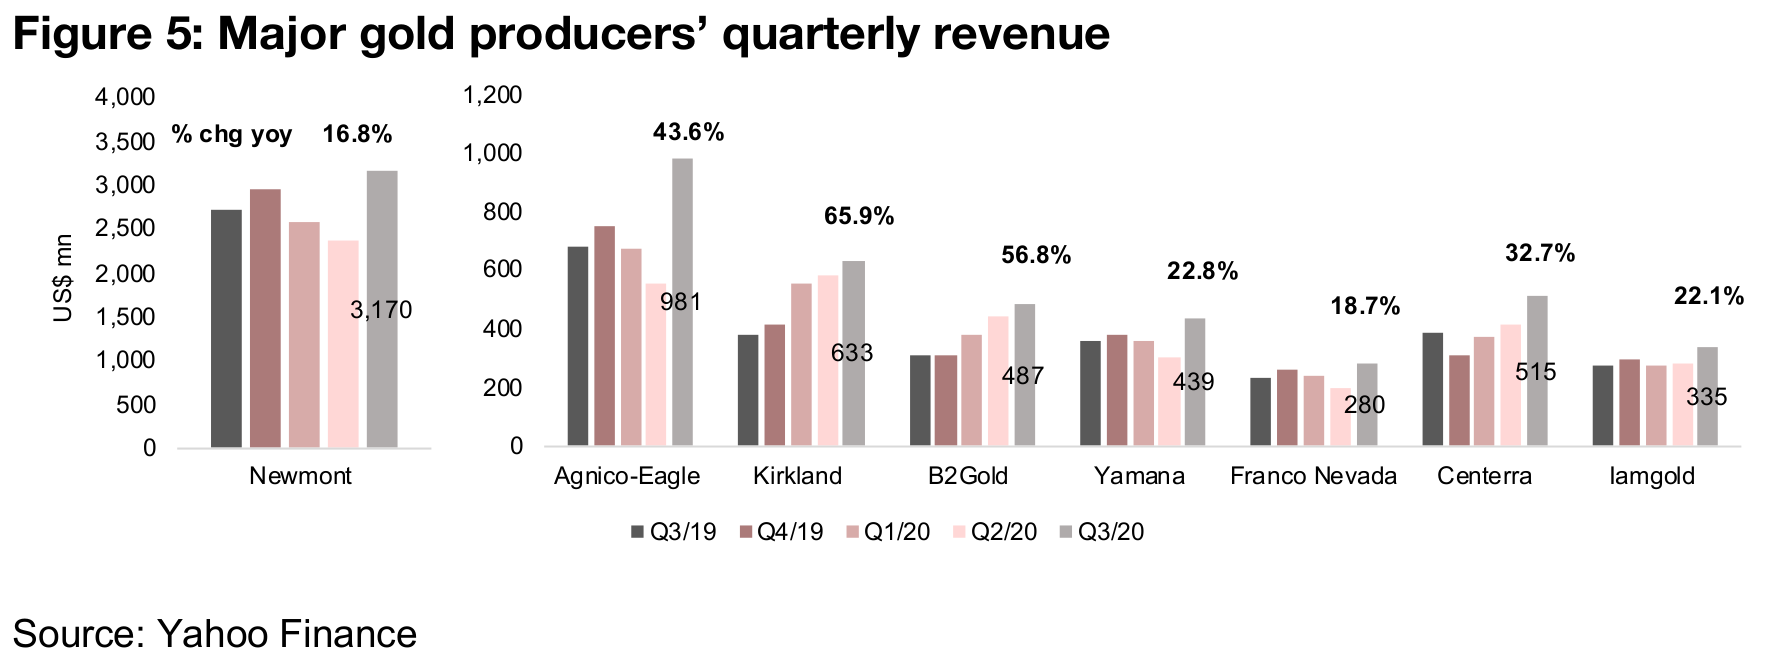 Strong Q3/20 for producers with most majors already reporting